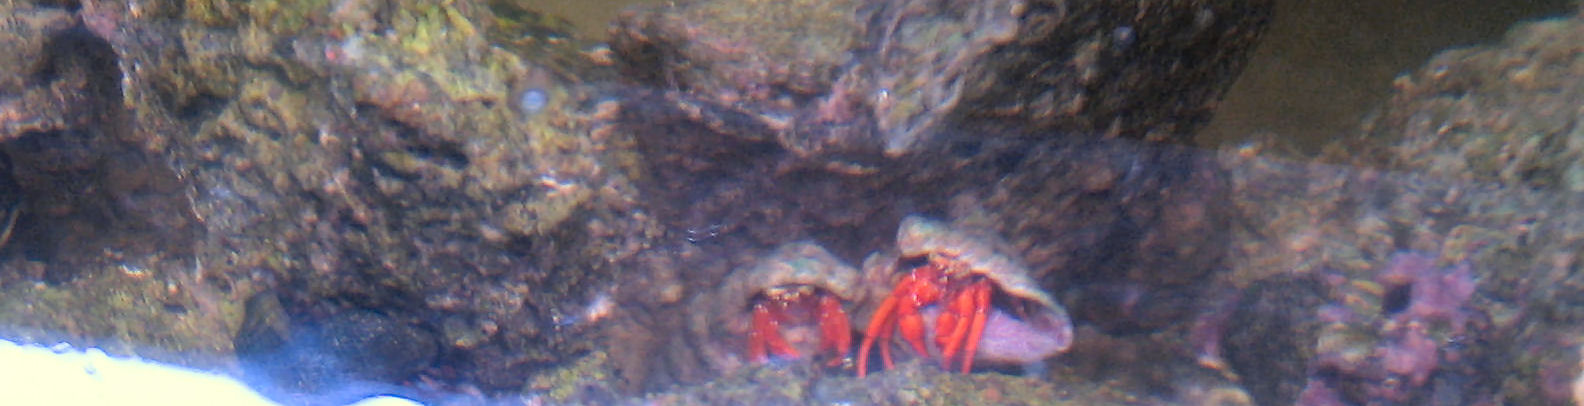 The crabs have *finally* stopped killing each other.

Poor quality due to digital camera, and leaning in over the water. Darn waves..